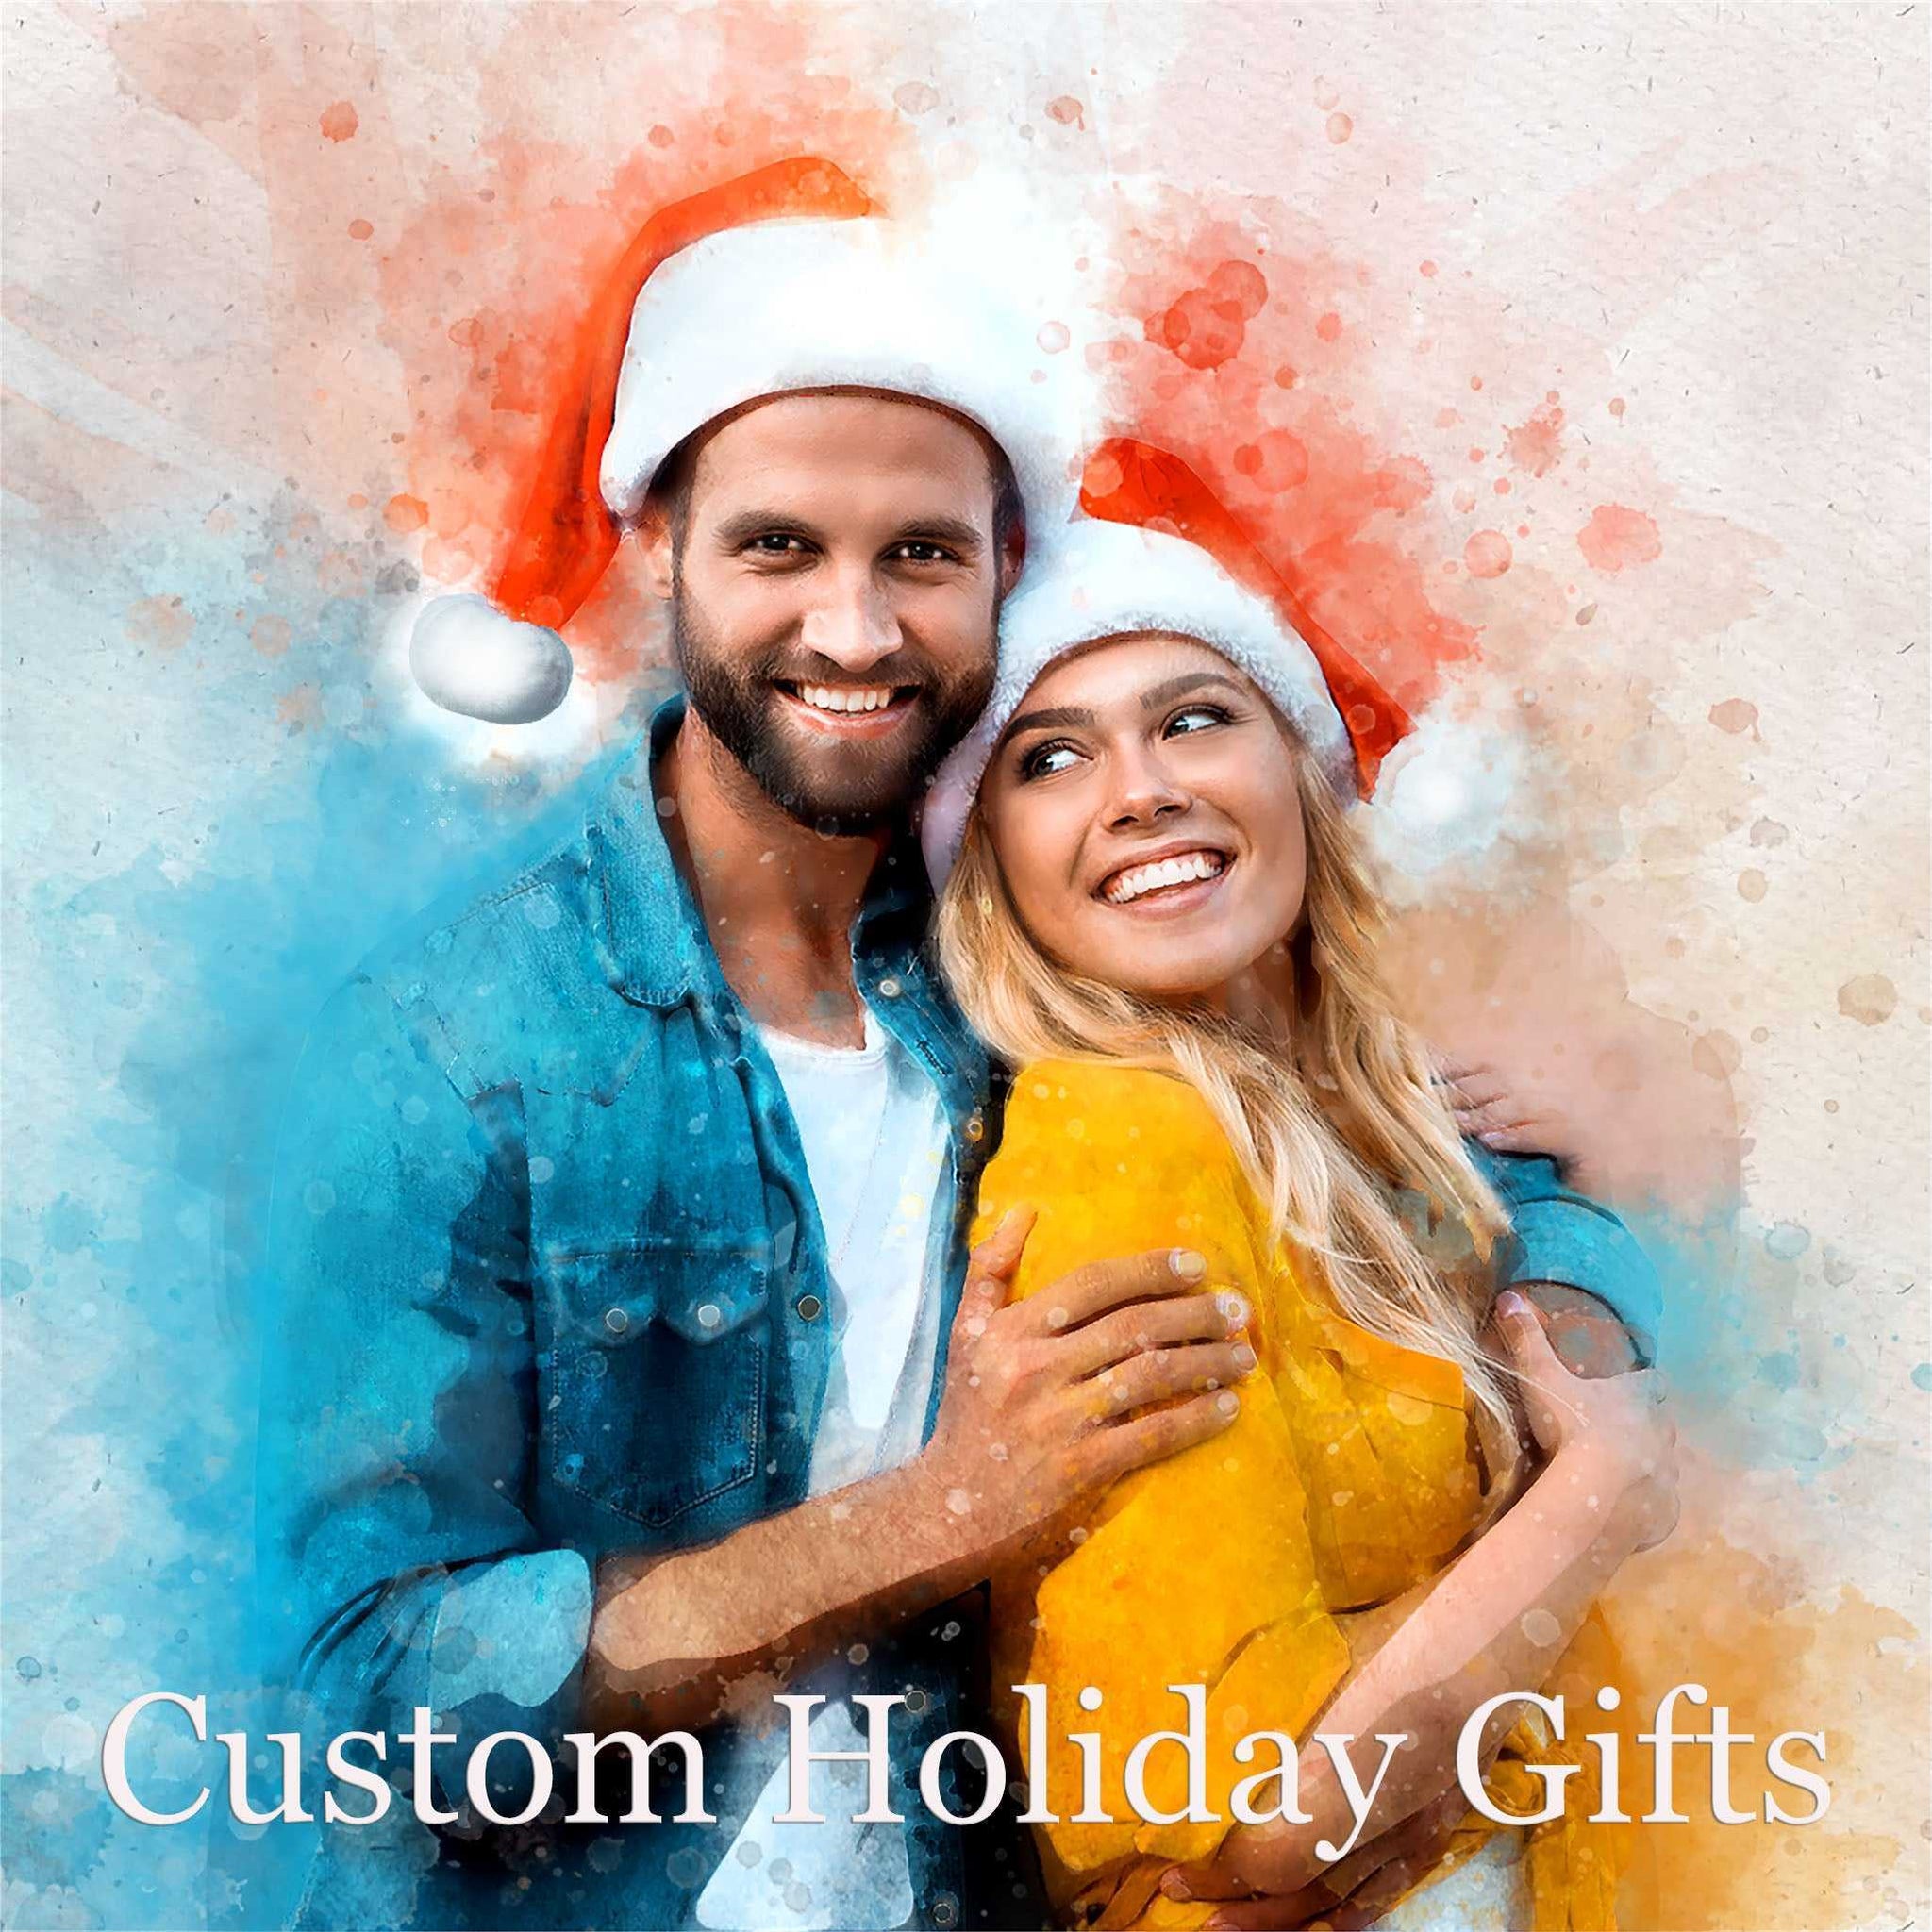 Christmas Gifts for Men | Christmas gift for Husband | XMAS Gifts for Husband - FromPicToArt